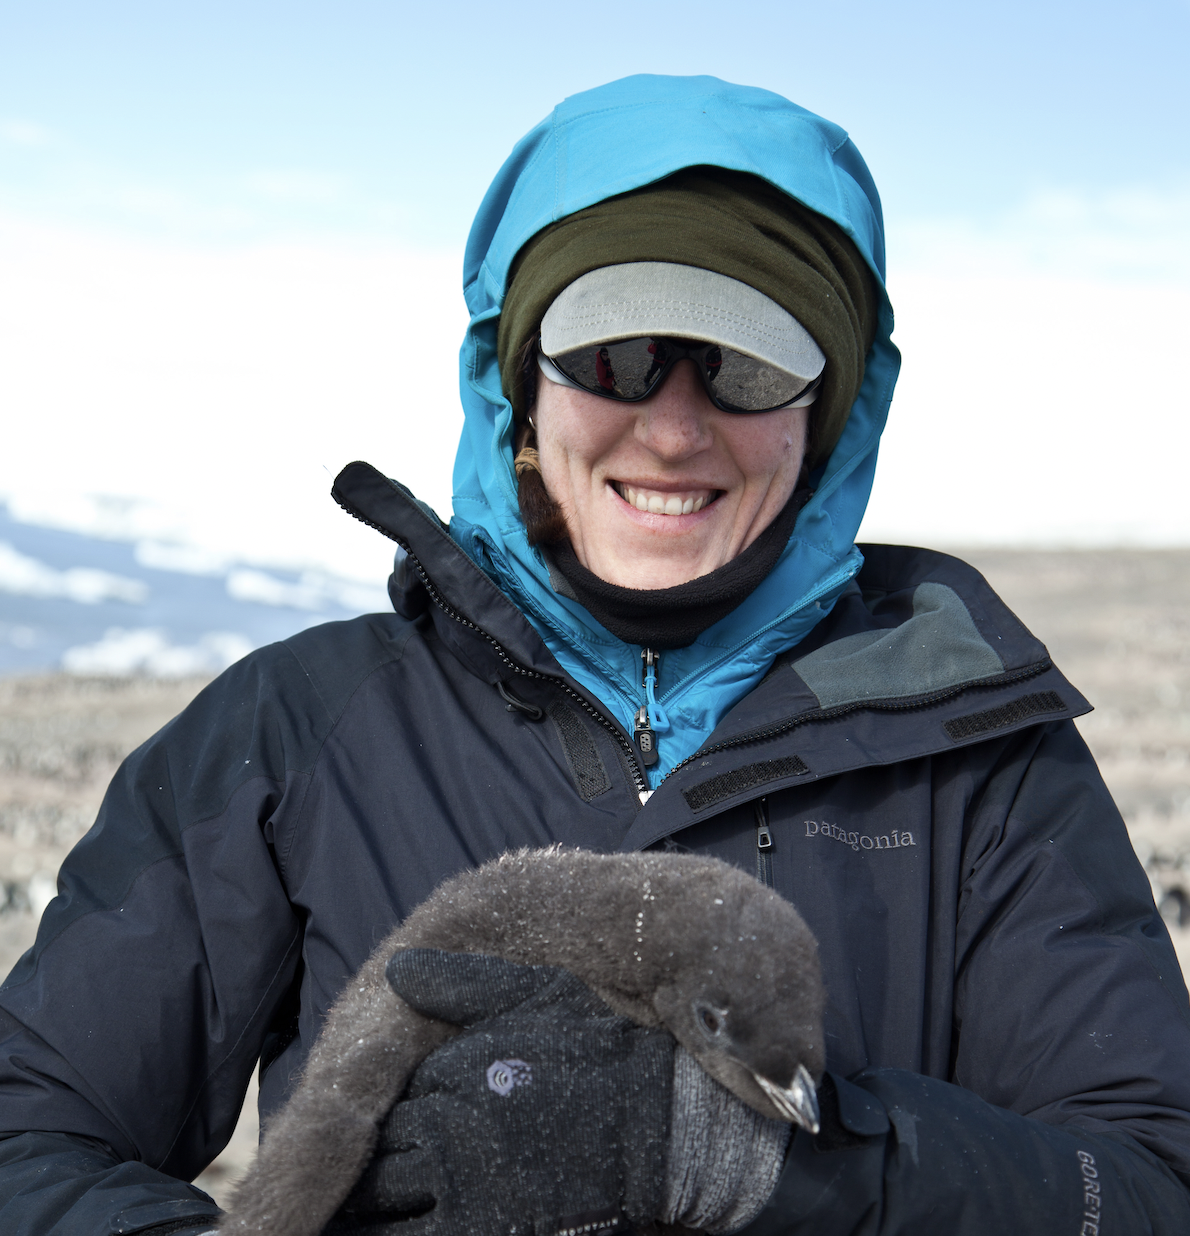 Annie Schmidt wearing a hat and blue hooded jackets and sunglasses, while holding a penguin chick in front of a blurred background scene of gray land